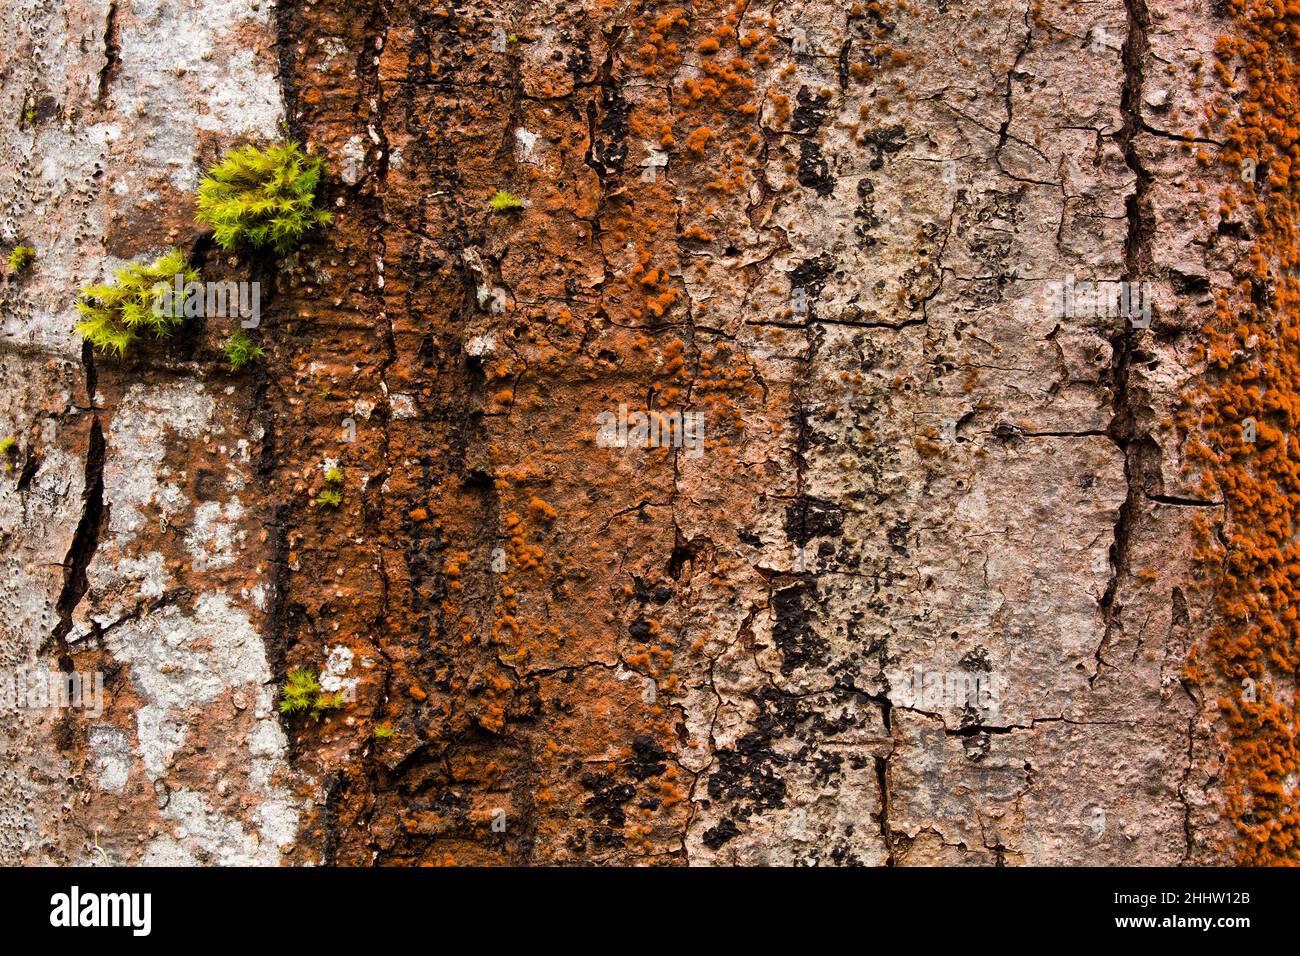 Detailed closeup of vibrant, lush moss and lichens on the bark of a tree trunk Stock Photo